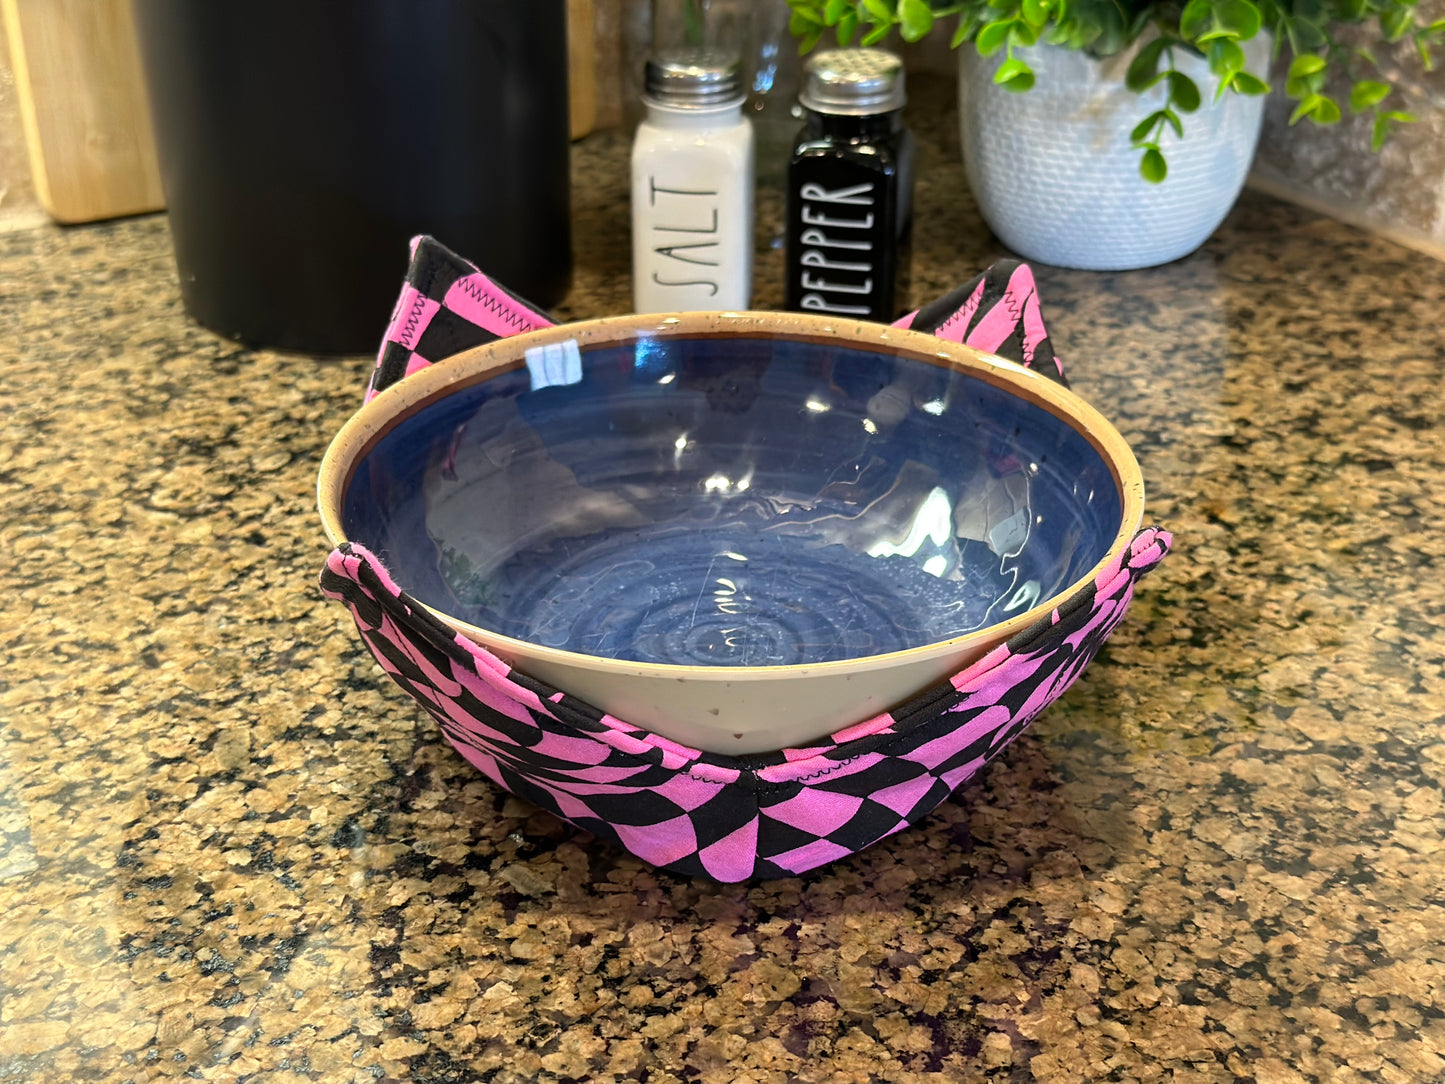 Pink Warped Checkered Microwave Bowl Cozy